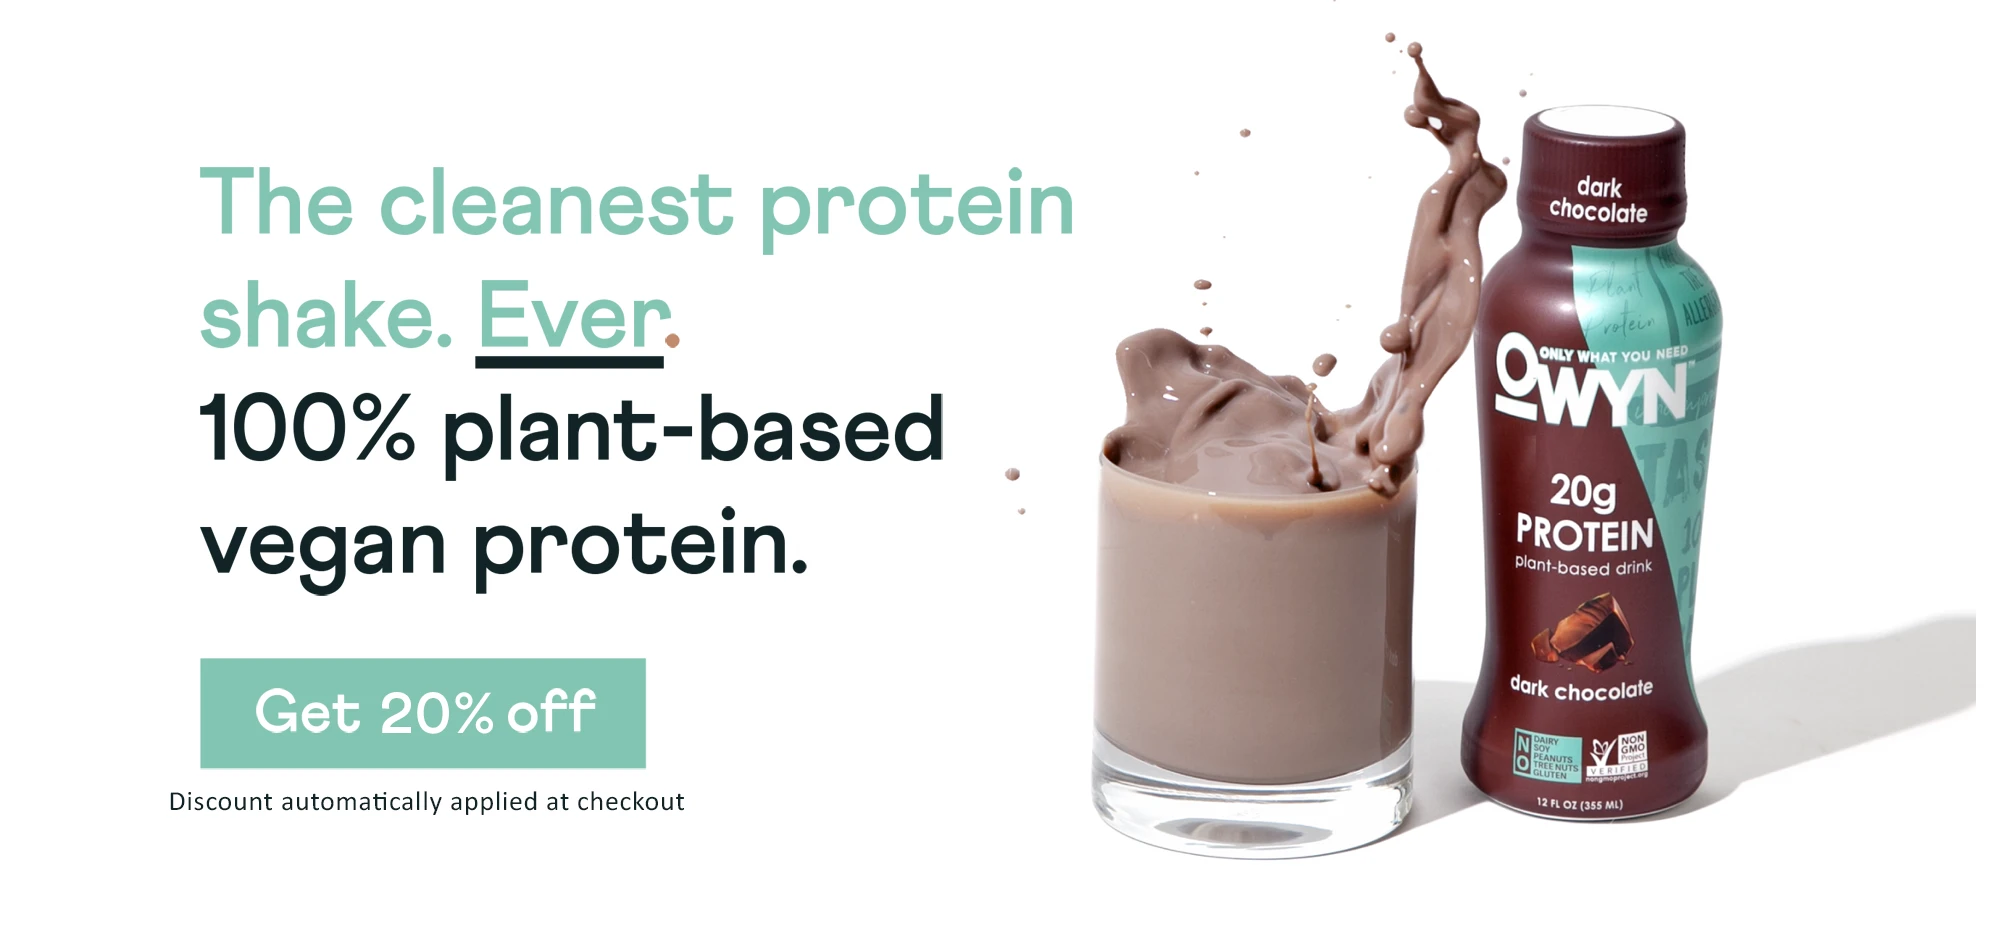 The cleanest protein shake. Ever. 100% plant-based vegan protein.